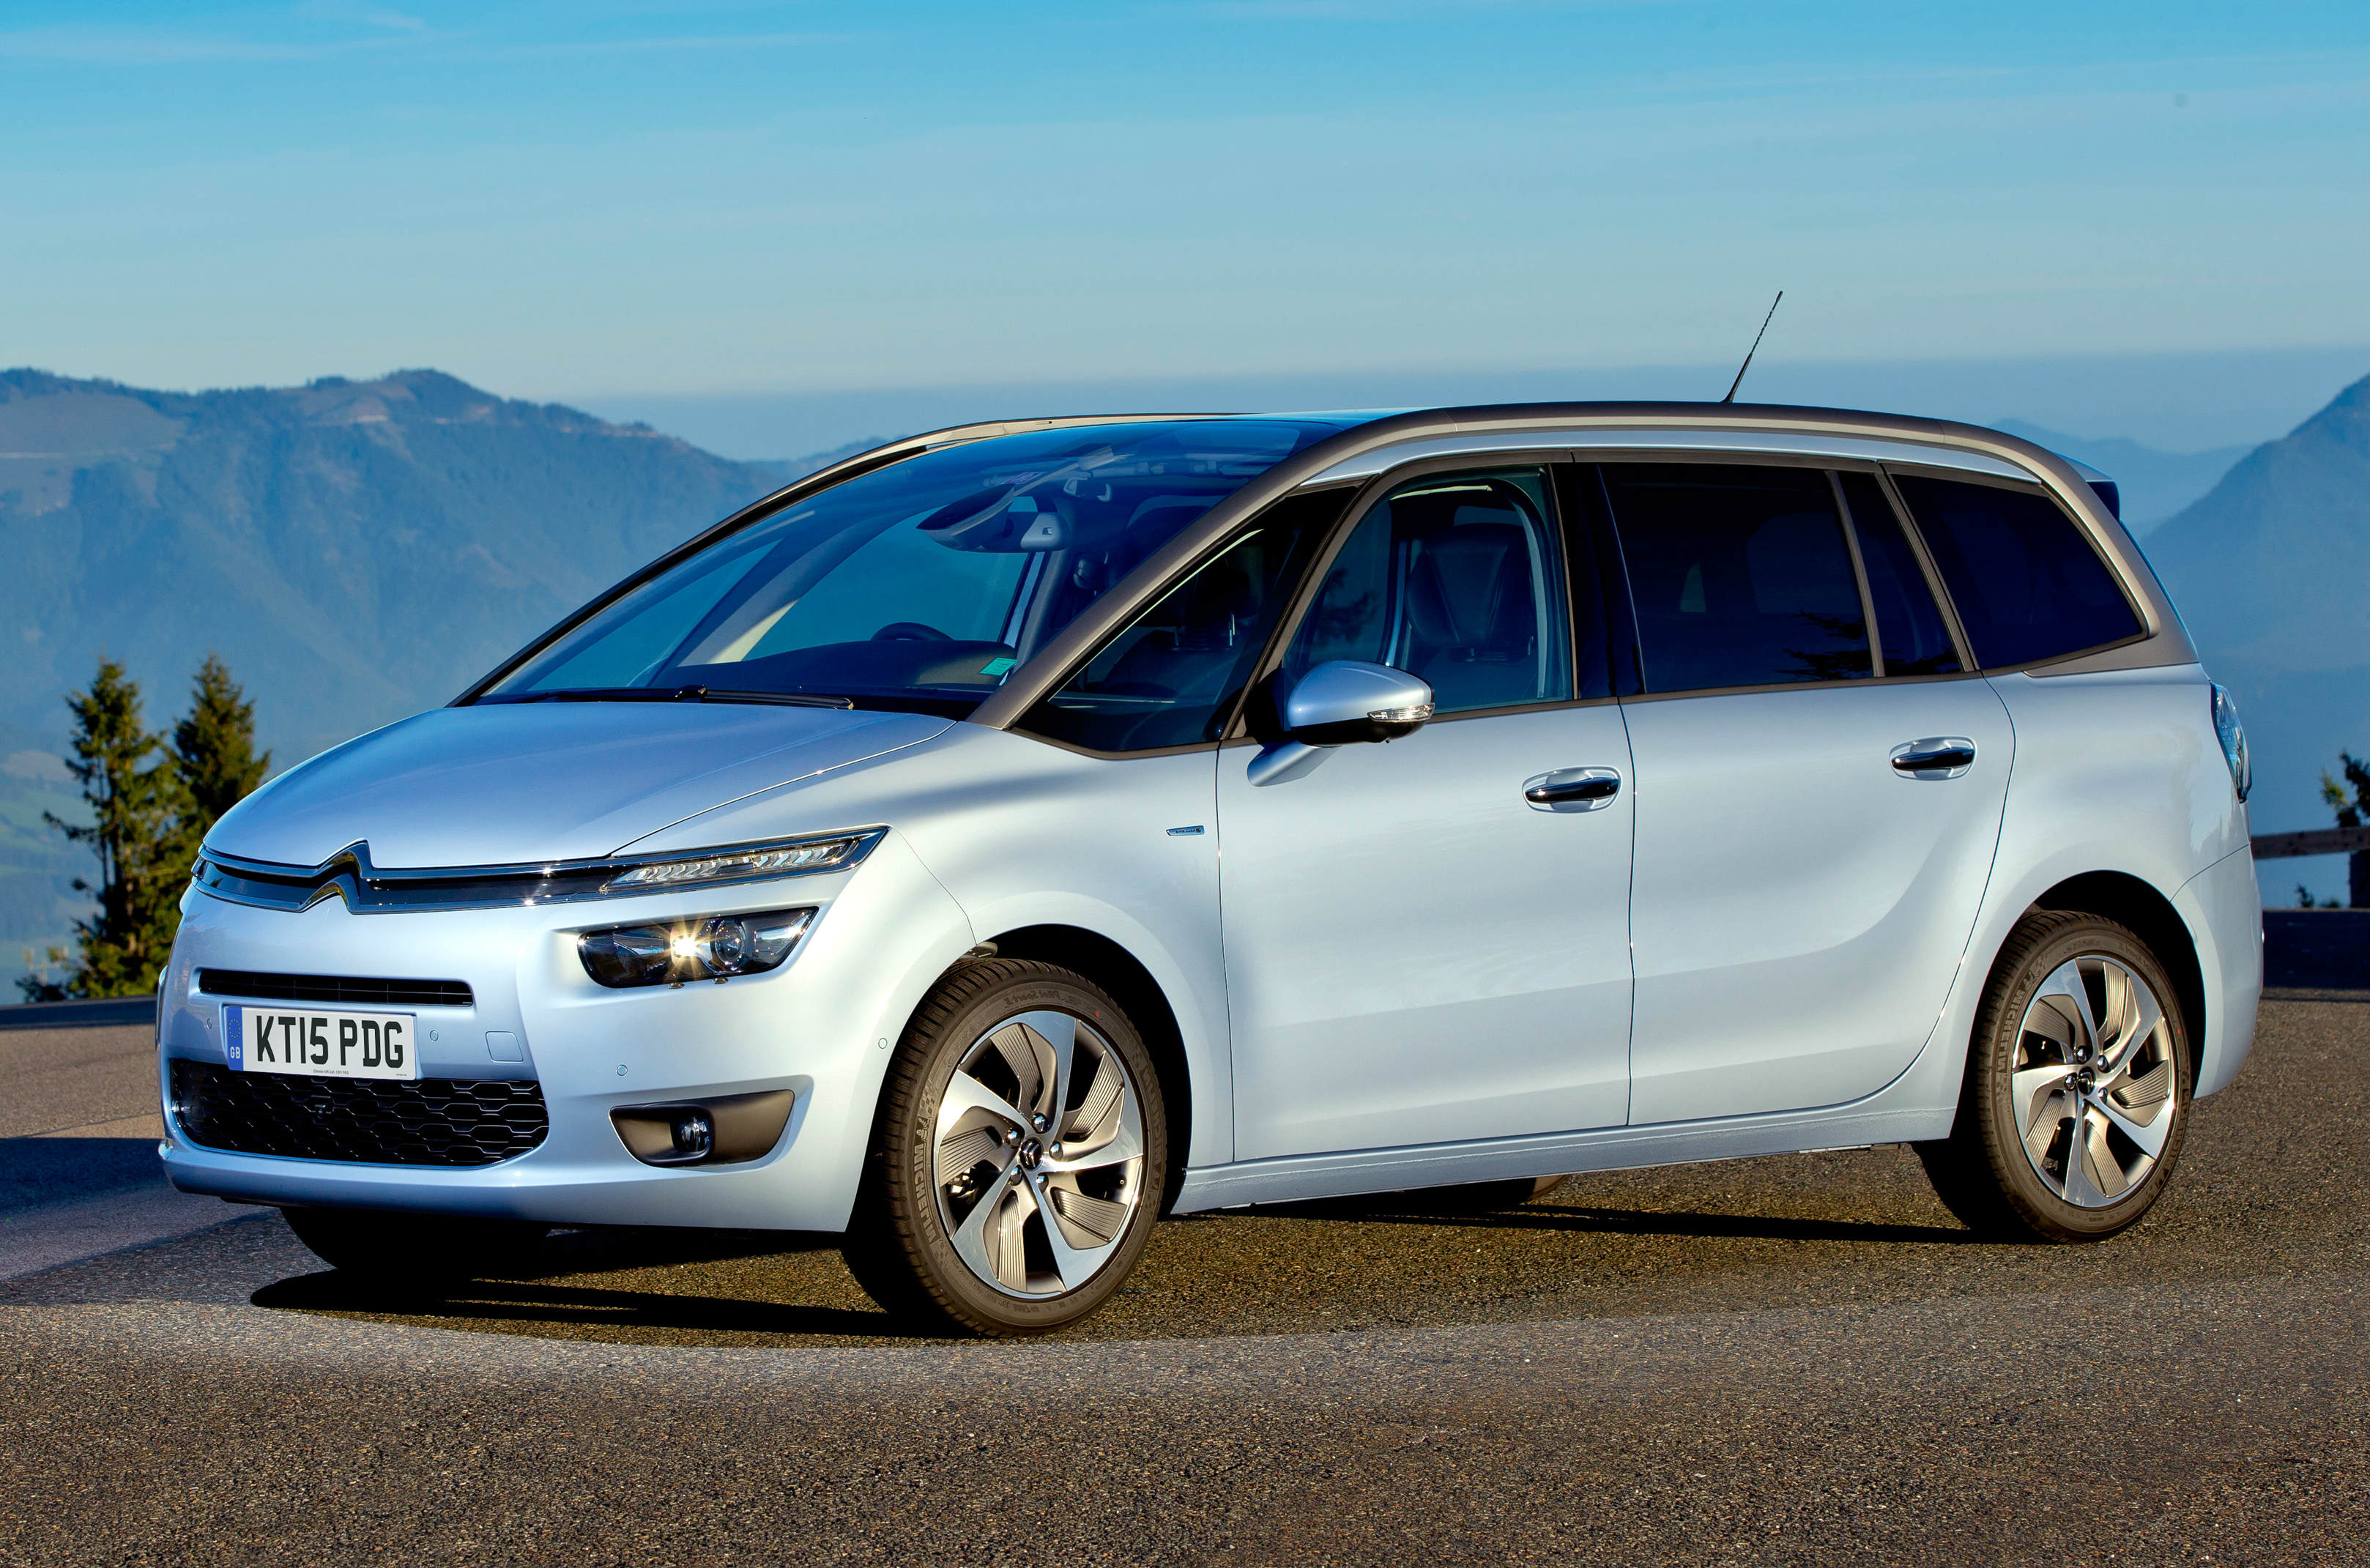 Citroean Grand C4 Picasso:  The Sunday Times Top 100 Cars - Top 5 Seven-Seat MPVs